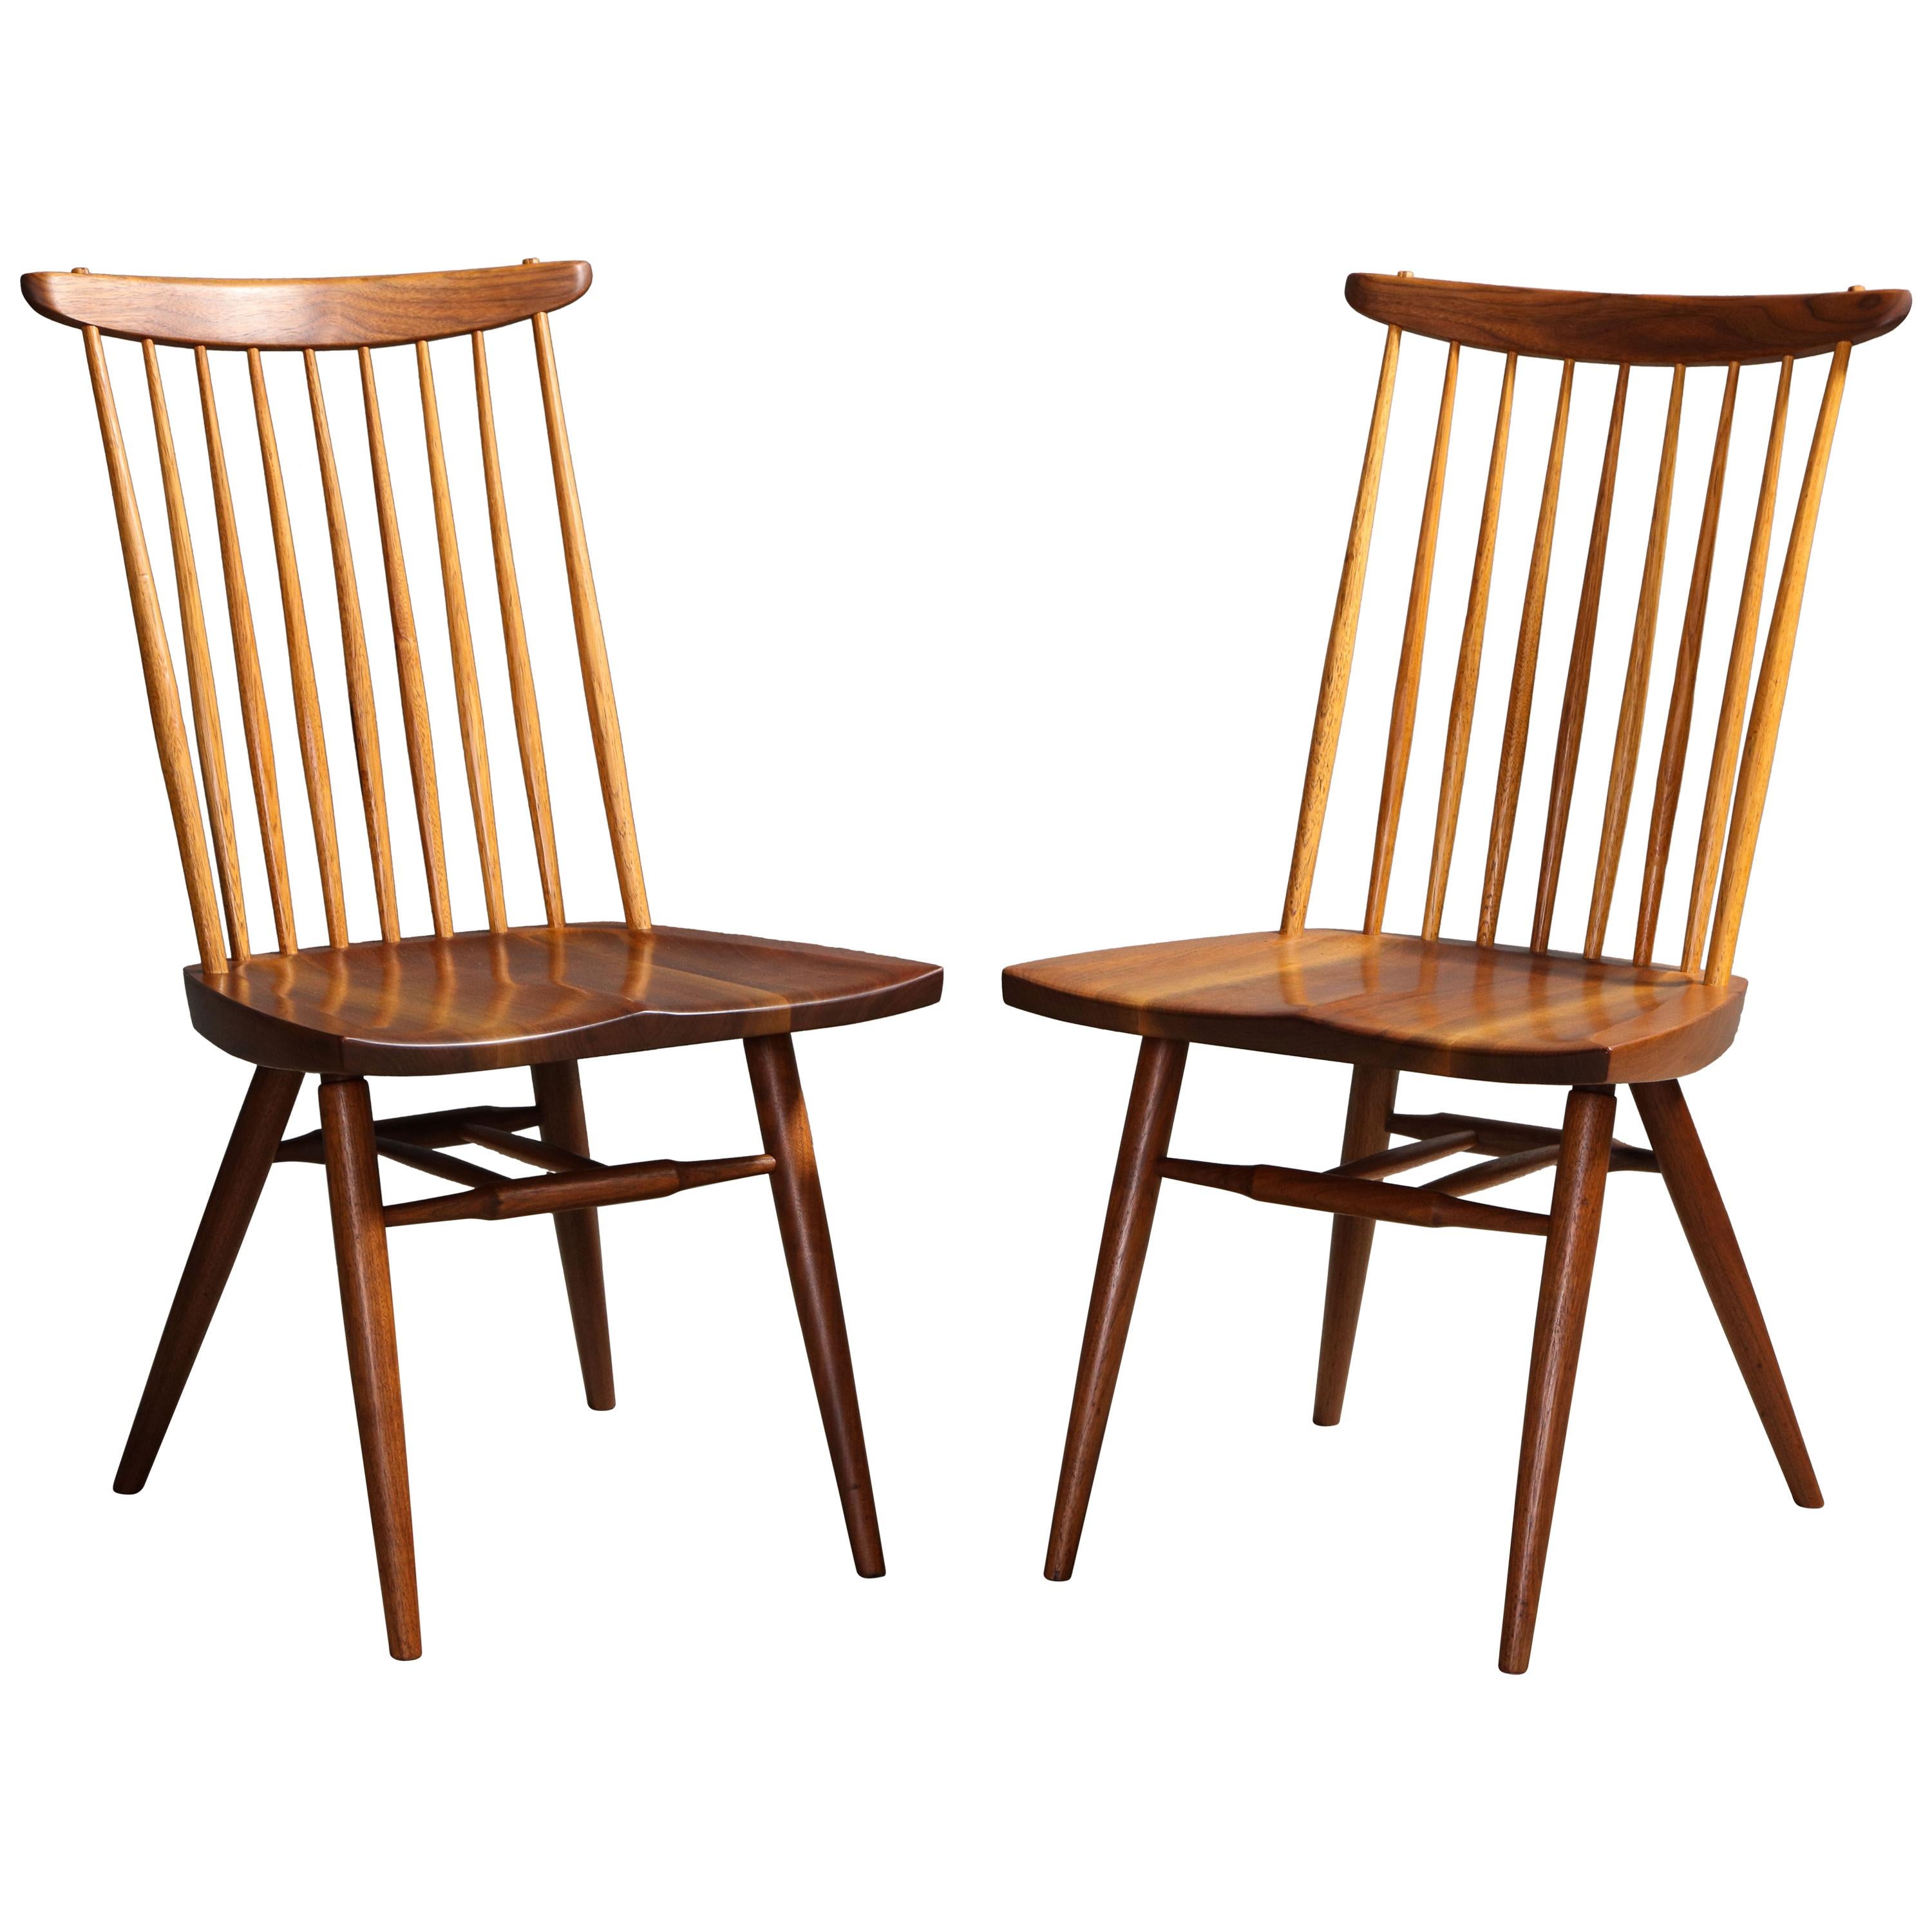 Two "New Chairs", by George Nakashima